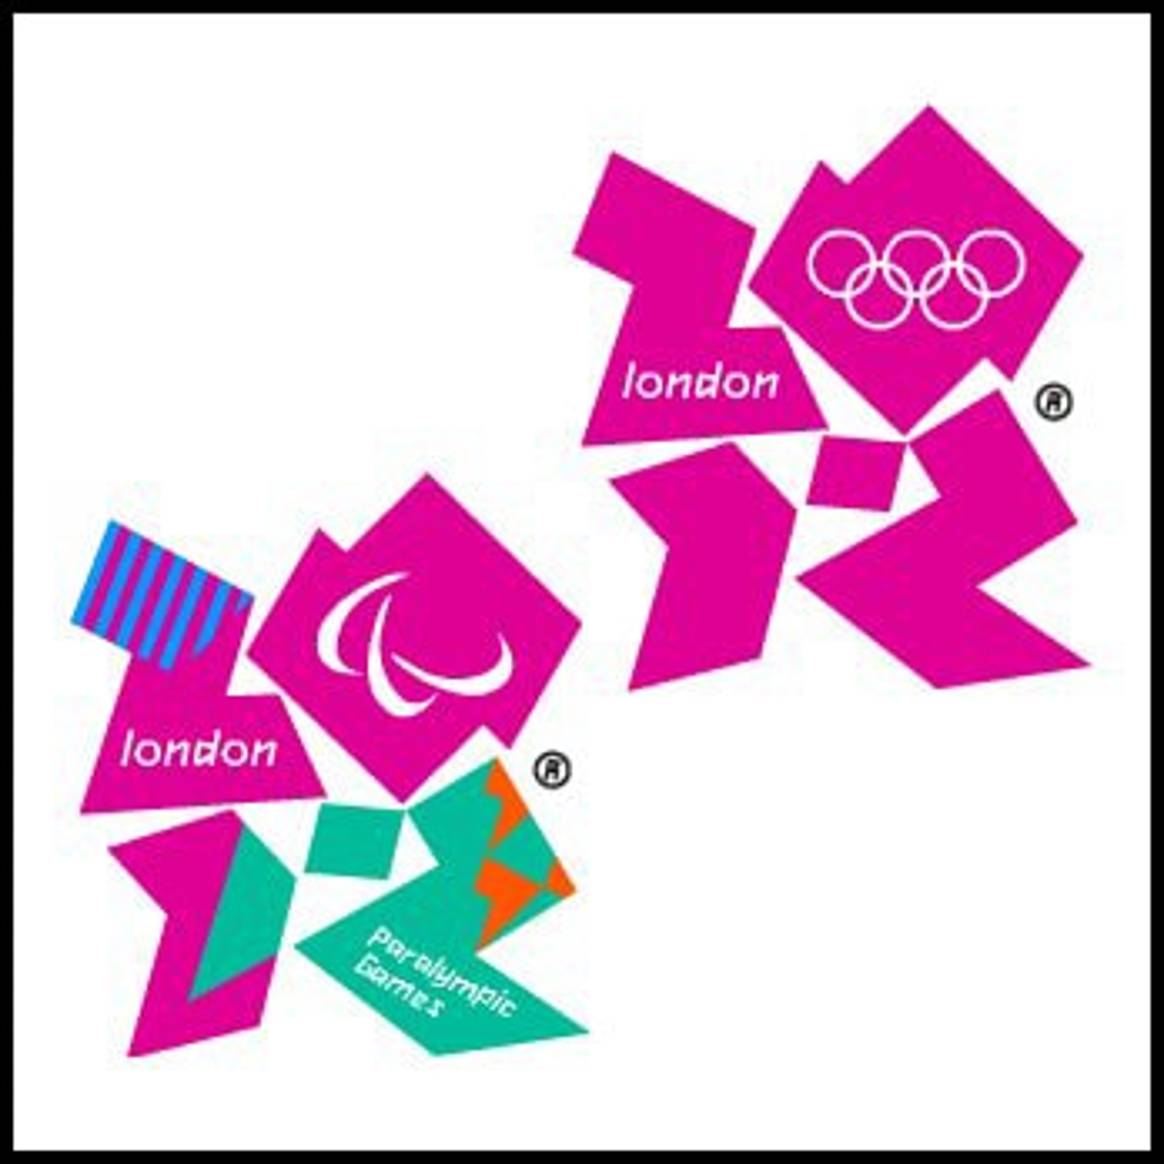 Olympics brings opportunities to sportswear manufacturers